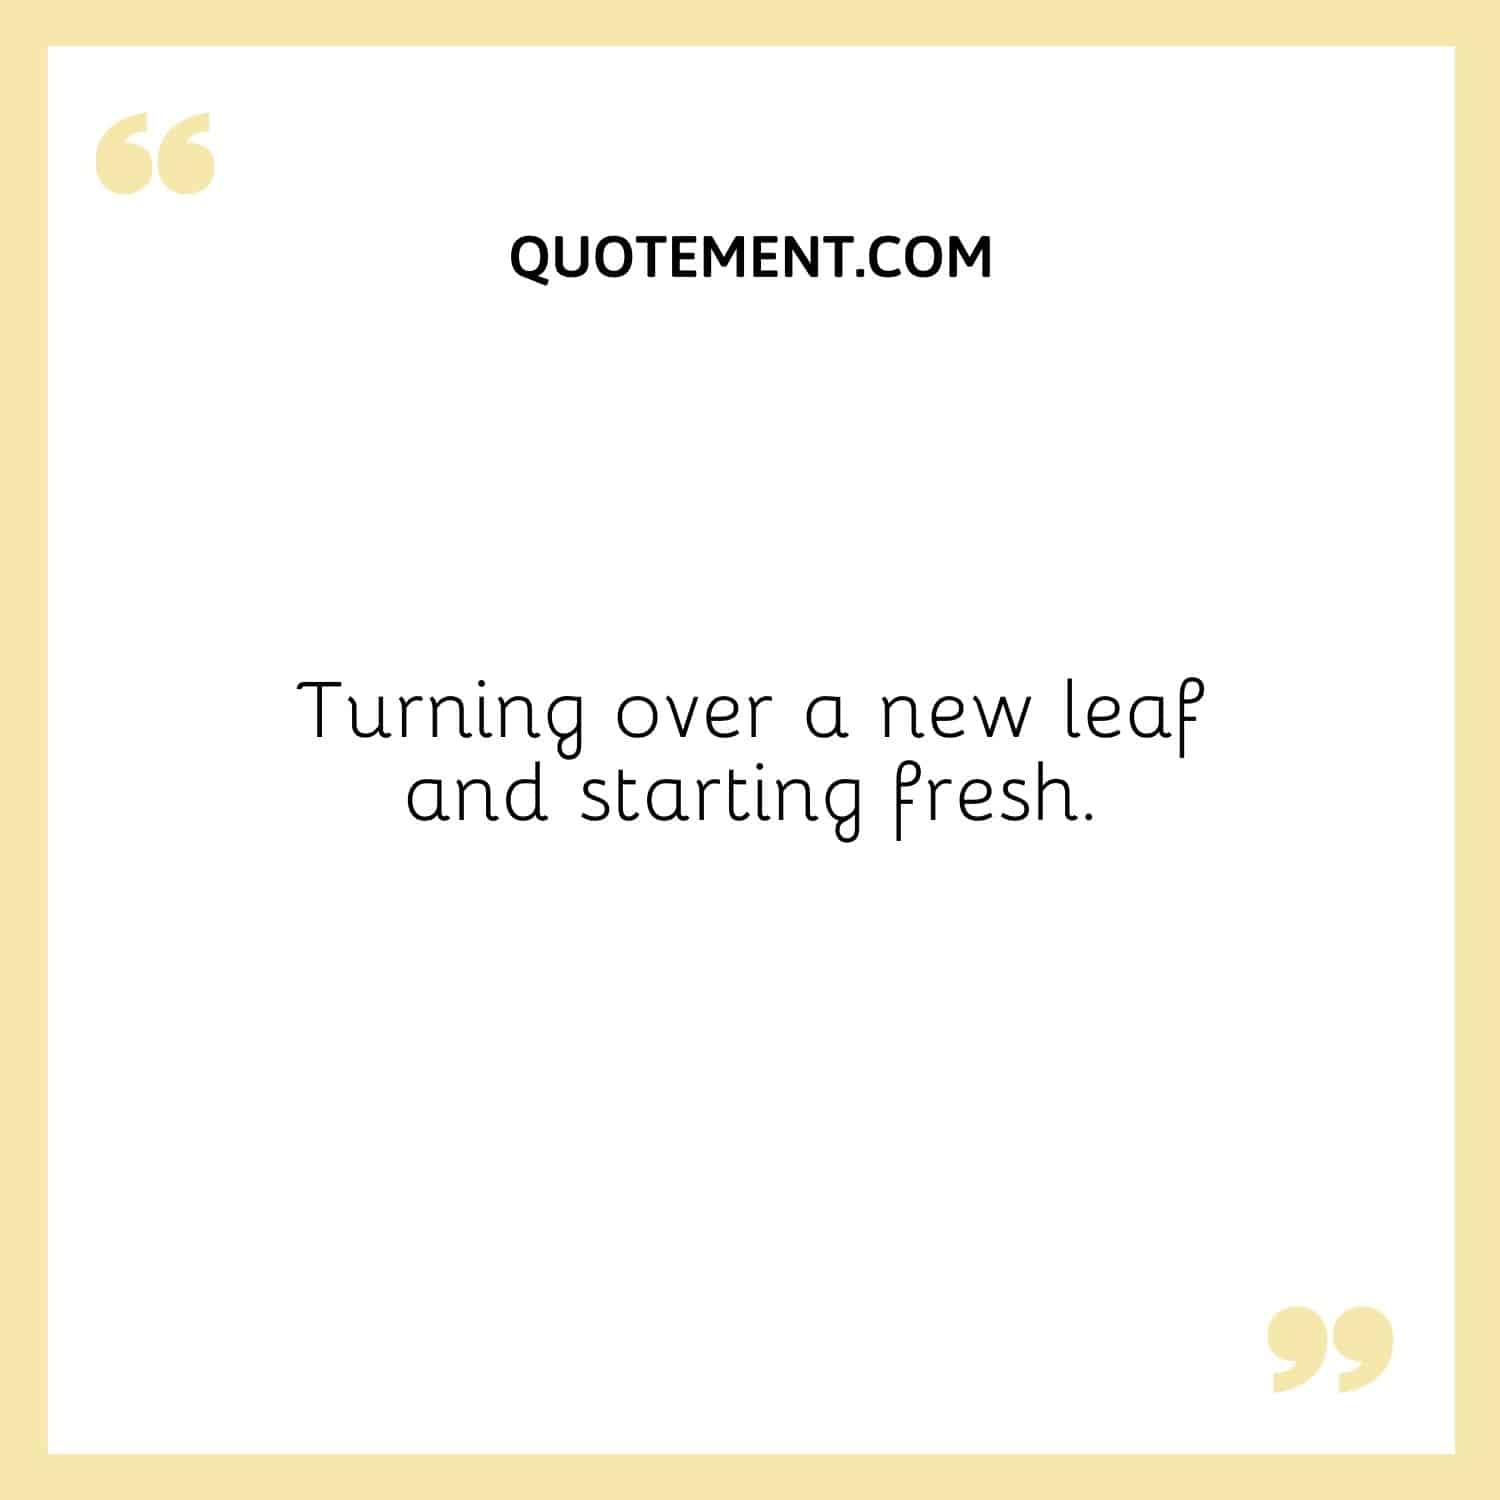 Turning over a new leaf and starting fresh.